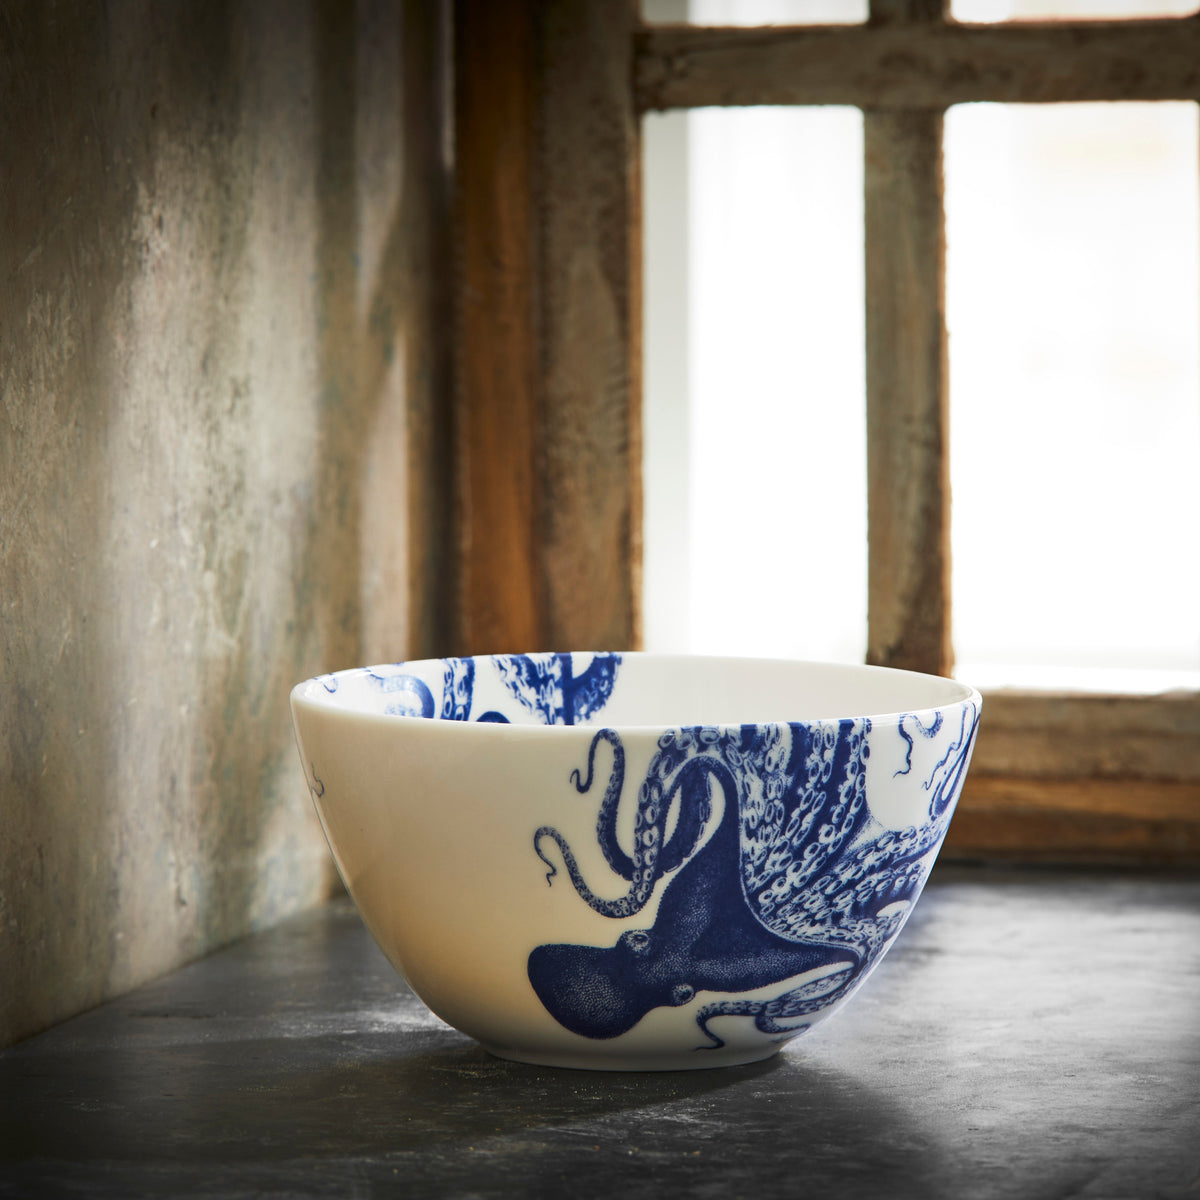 A Caskata Lucy Cereal Bowl featuring Lucy the octopus is placed on a dark countertop near a window with natural light streaming through.